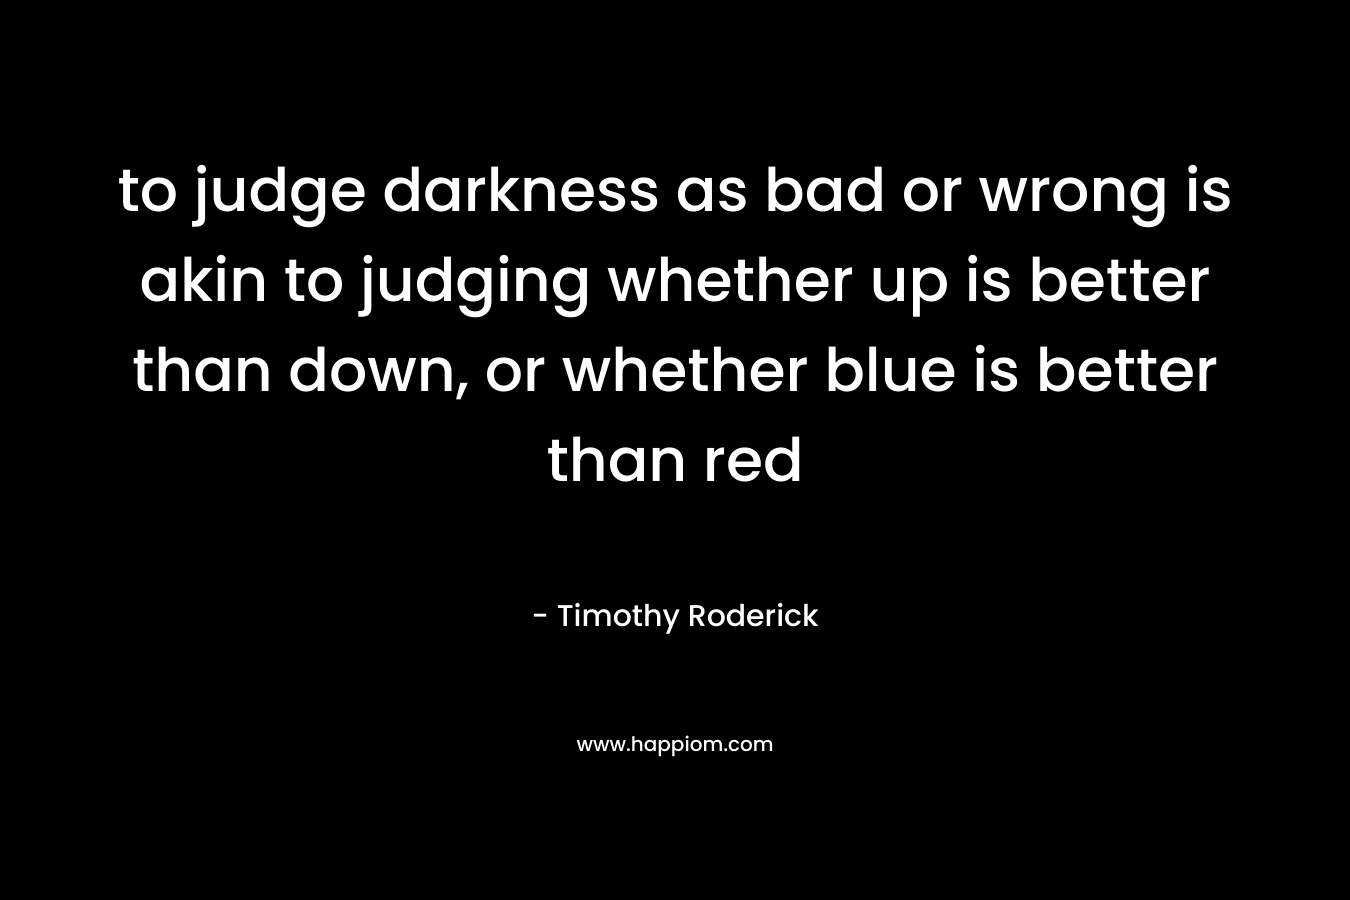 to judge darkness as bad or wrong is akin to judging whether up is better than down, or whether blue is better than red – Timothy Roderick